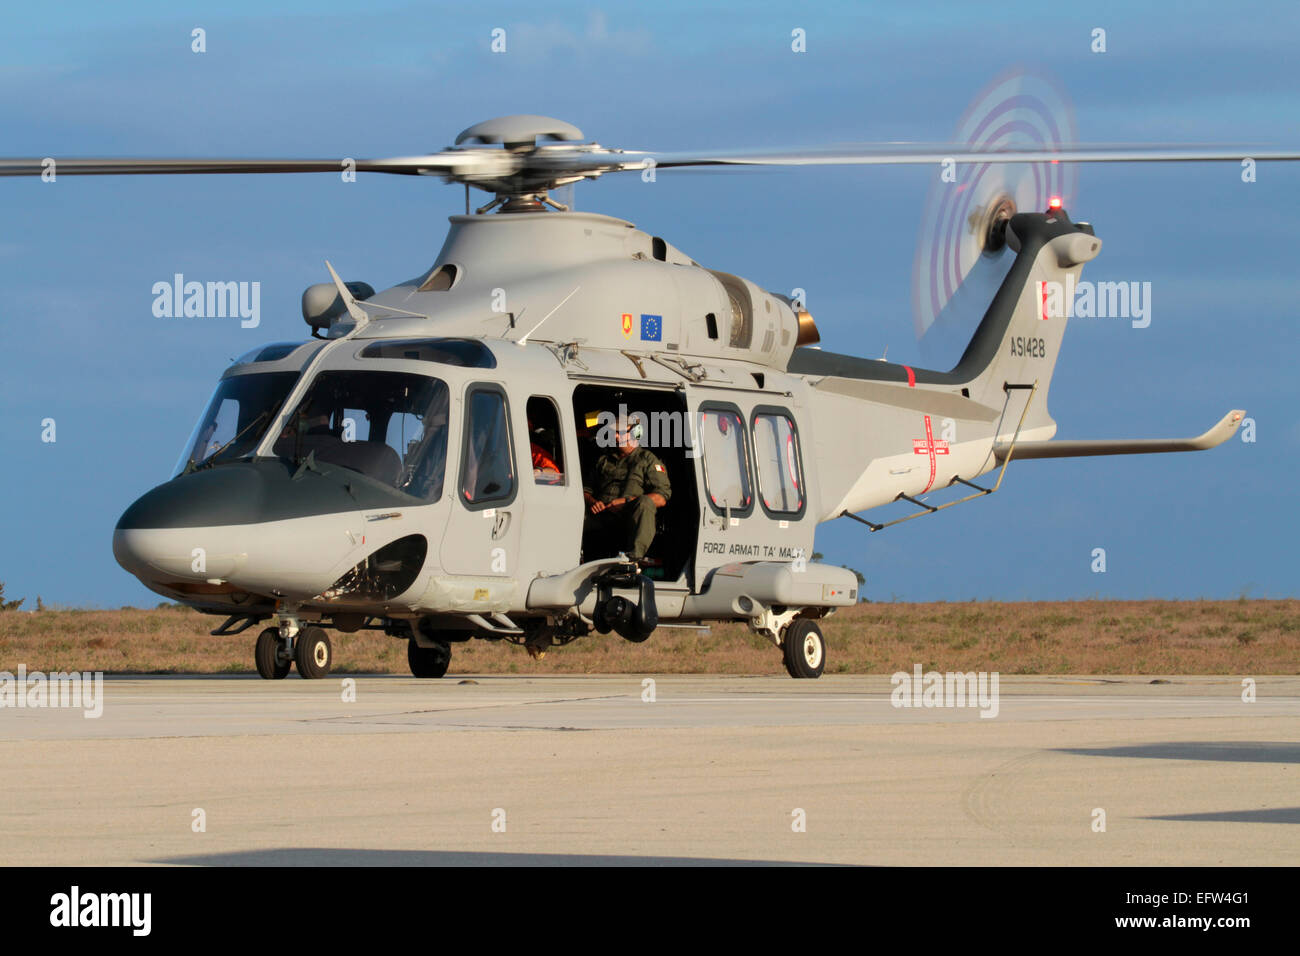 Military helicopter. AgustaWestland AW139 of the Armed Forces of Malta on the ground with engine running and rotors turning Stock Photo